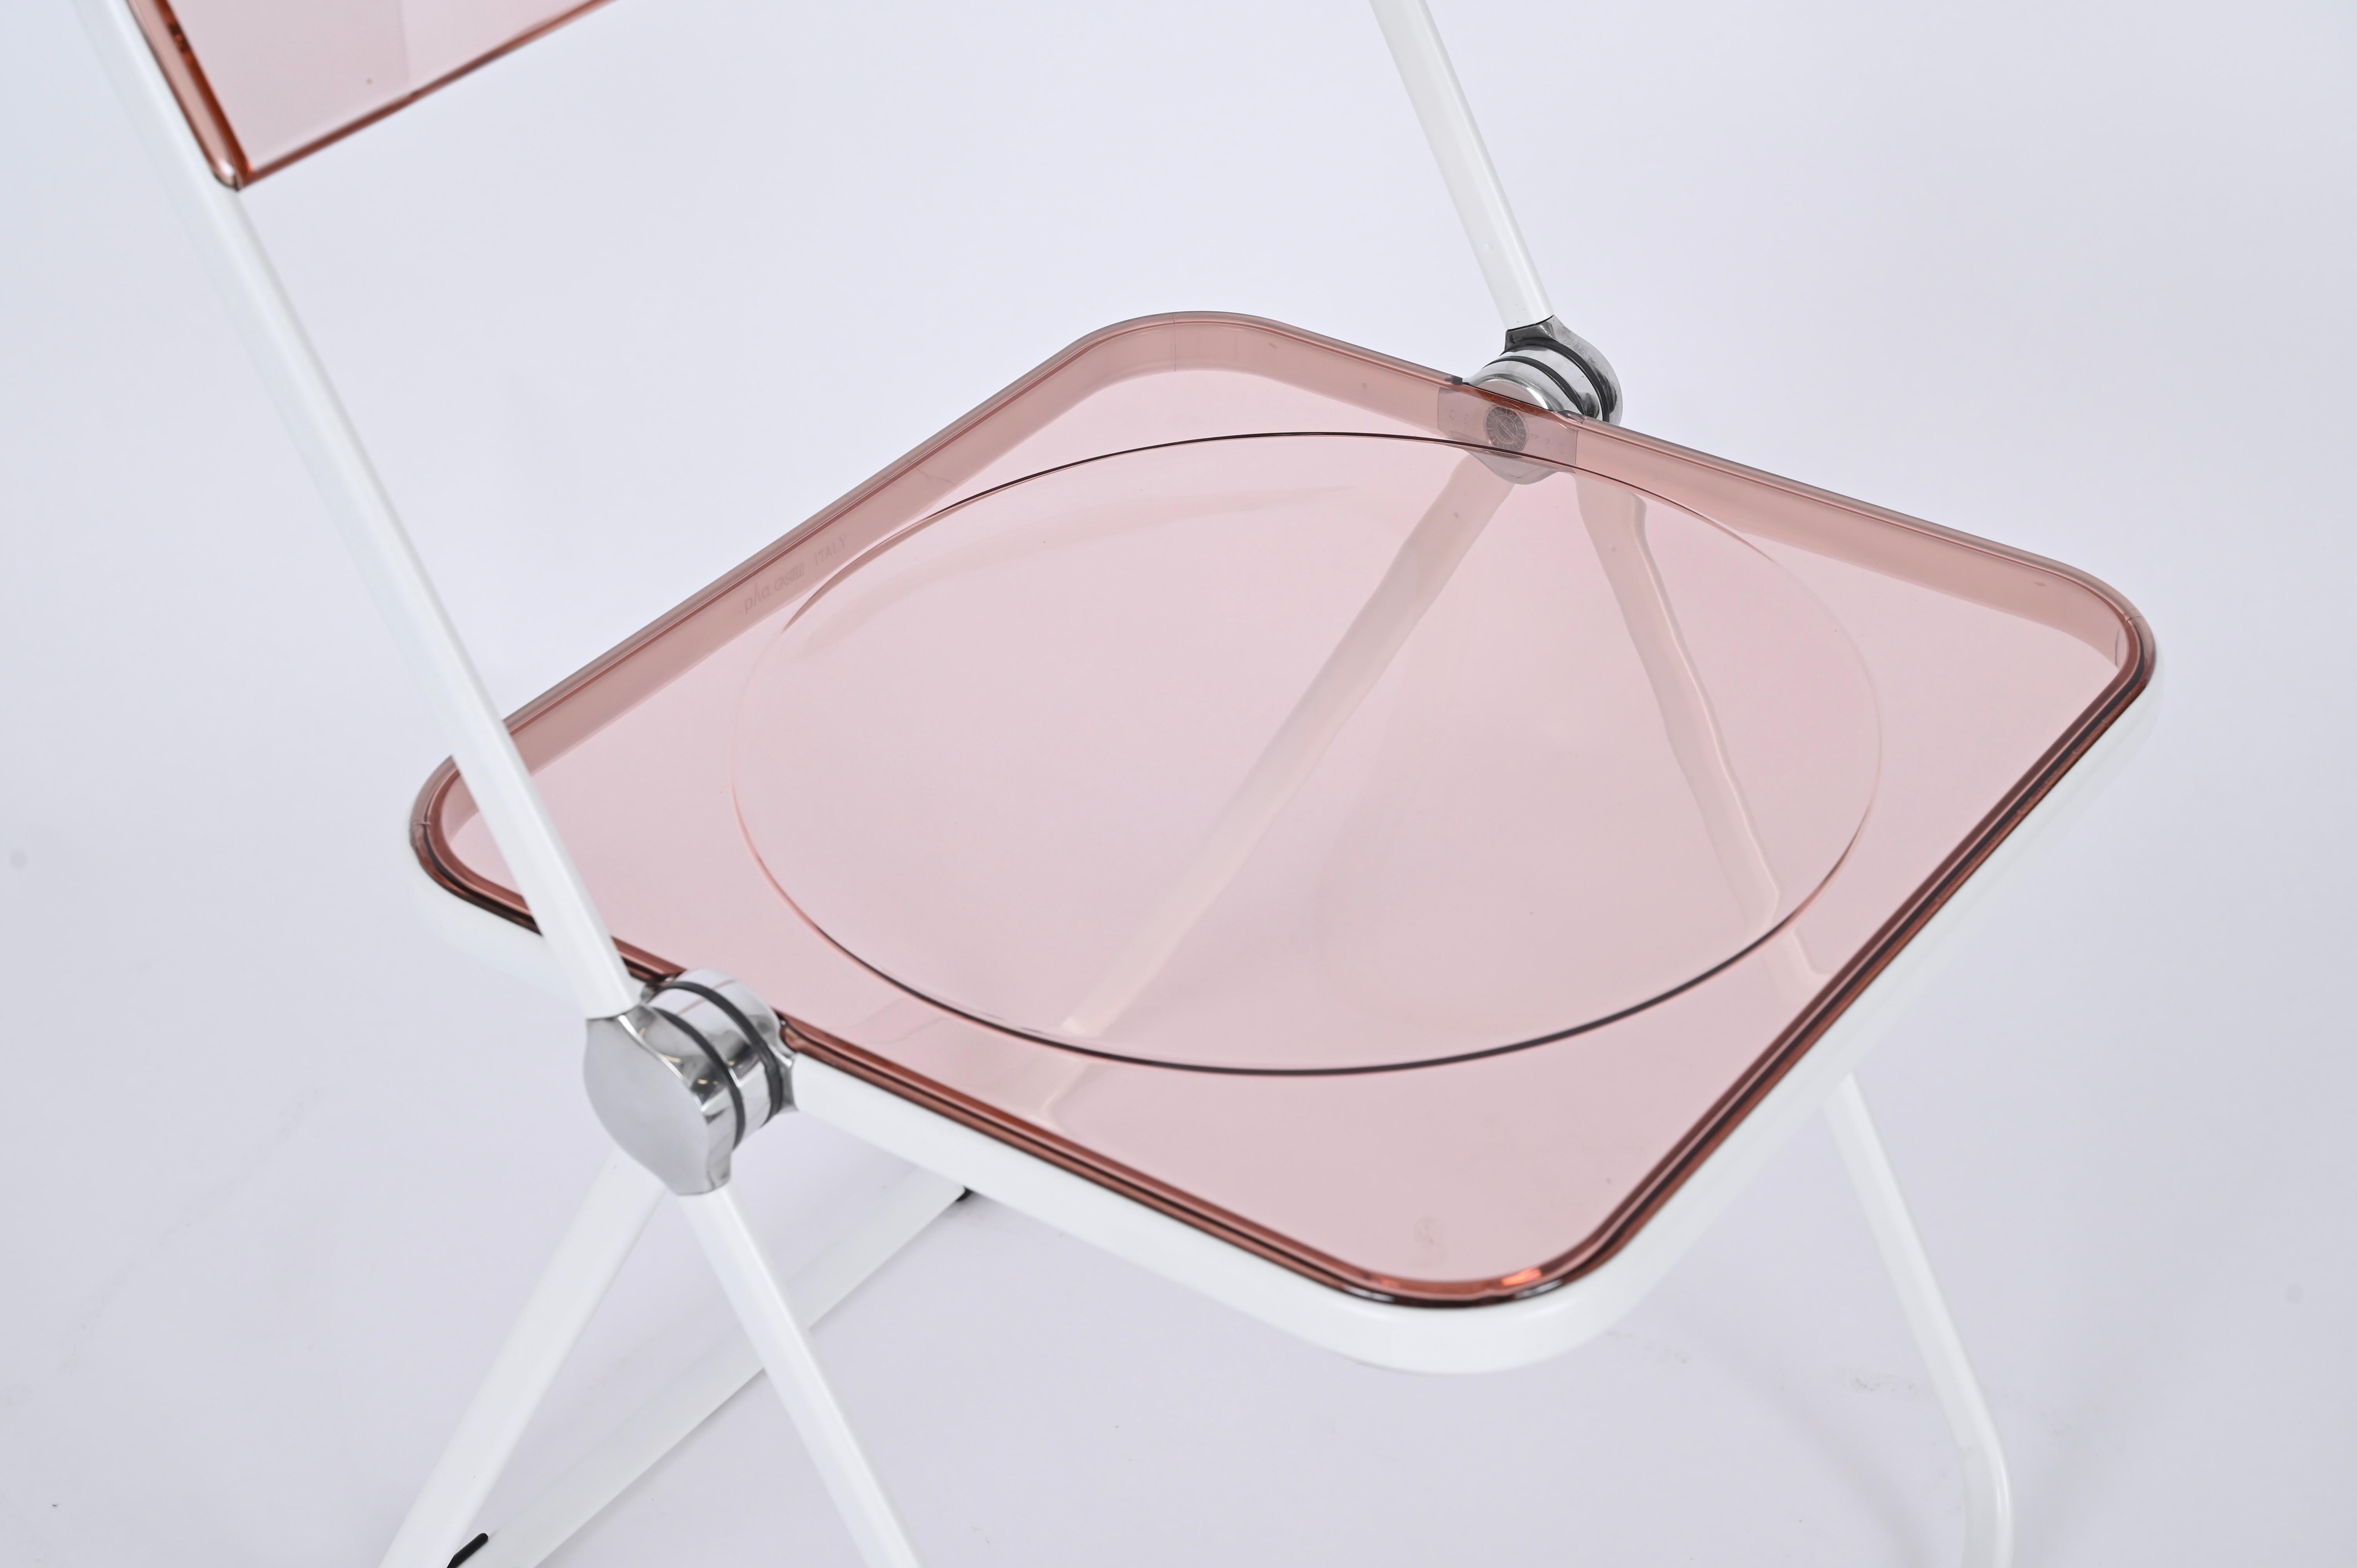 Giancarlo Piretti Lucite Pink and White Folding Plia Chairs for Castelli, 1970s For Sale 3